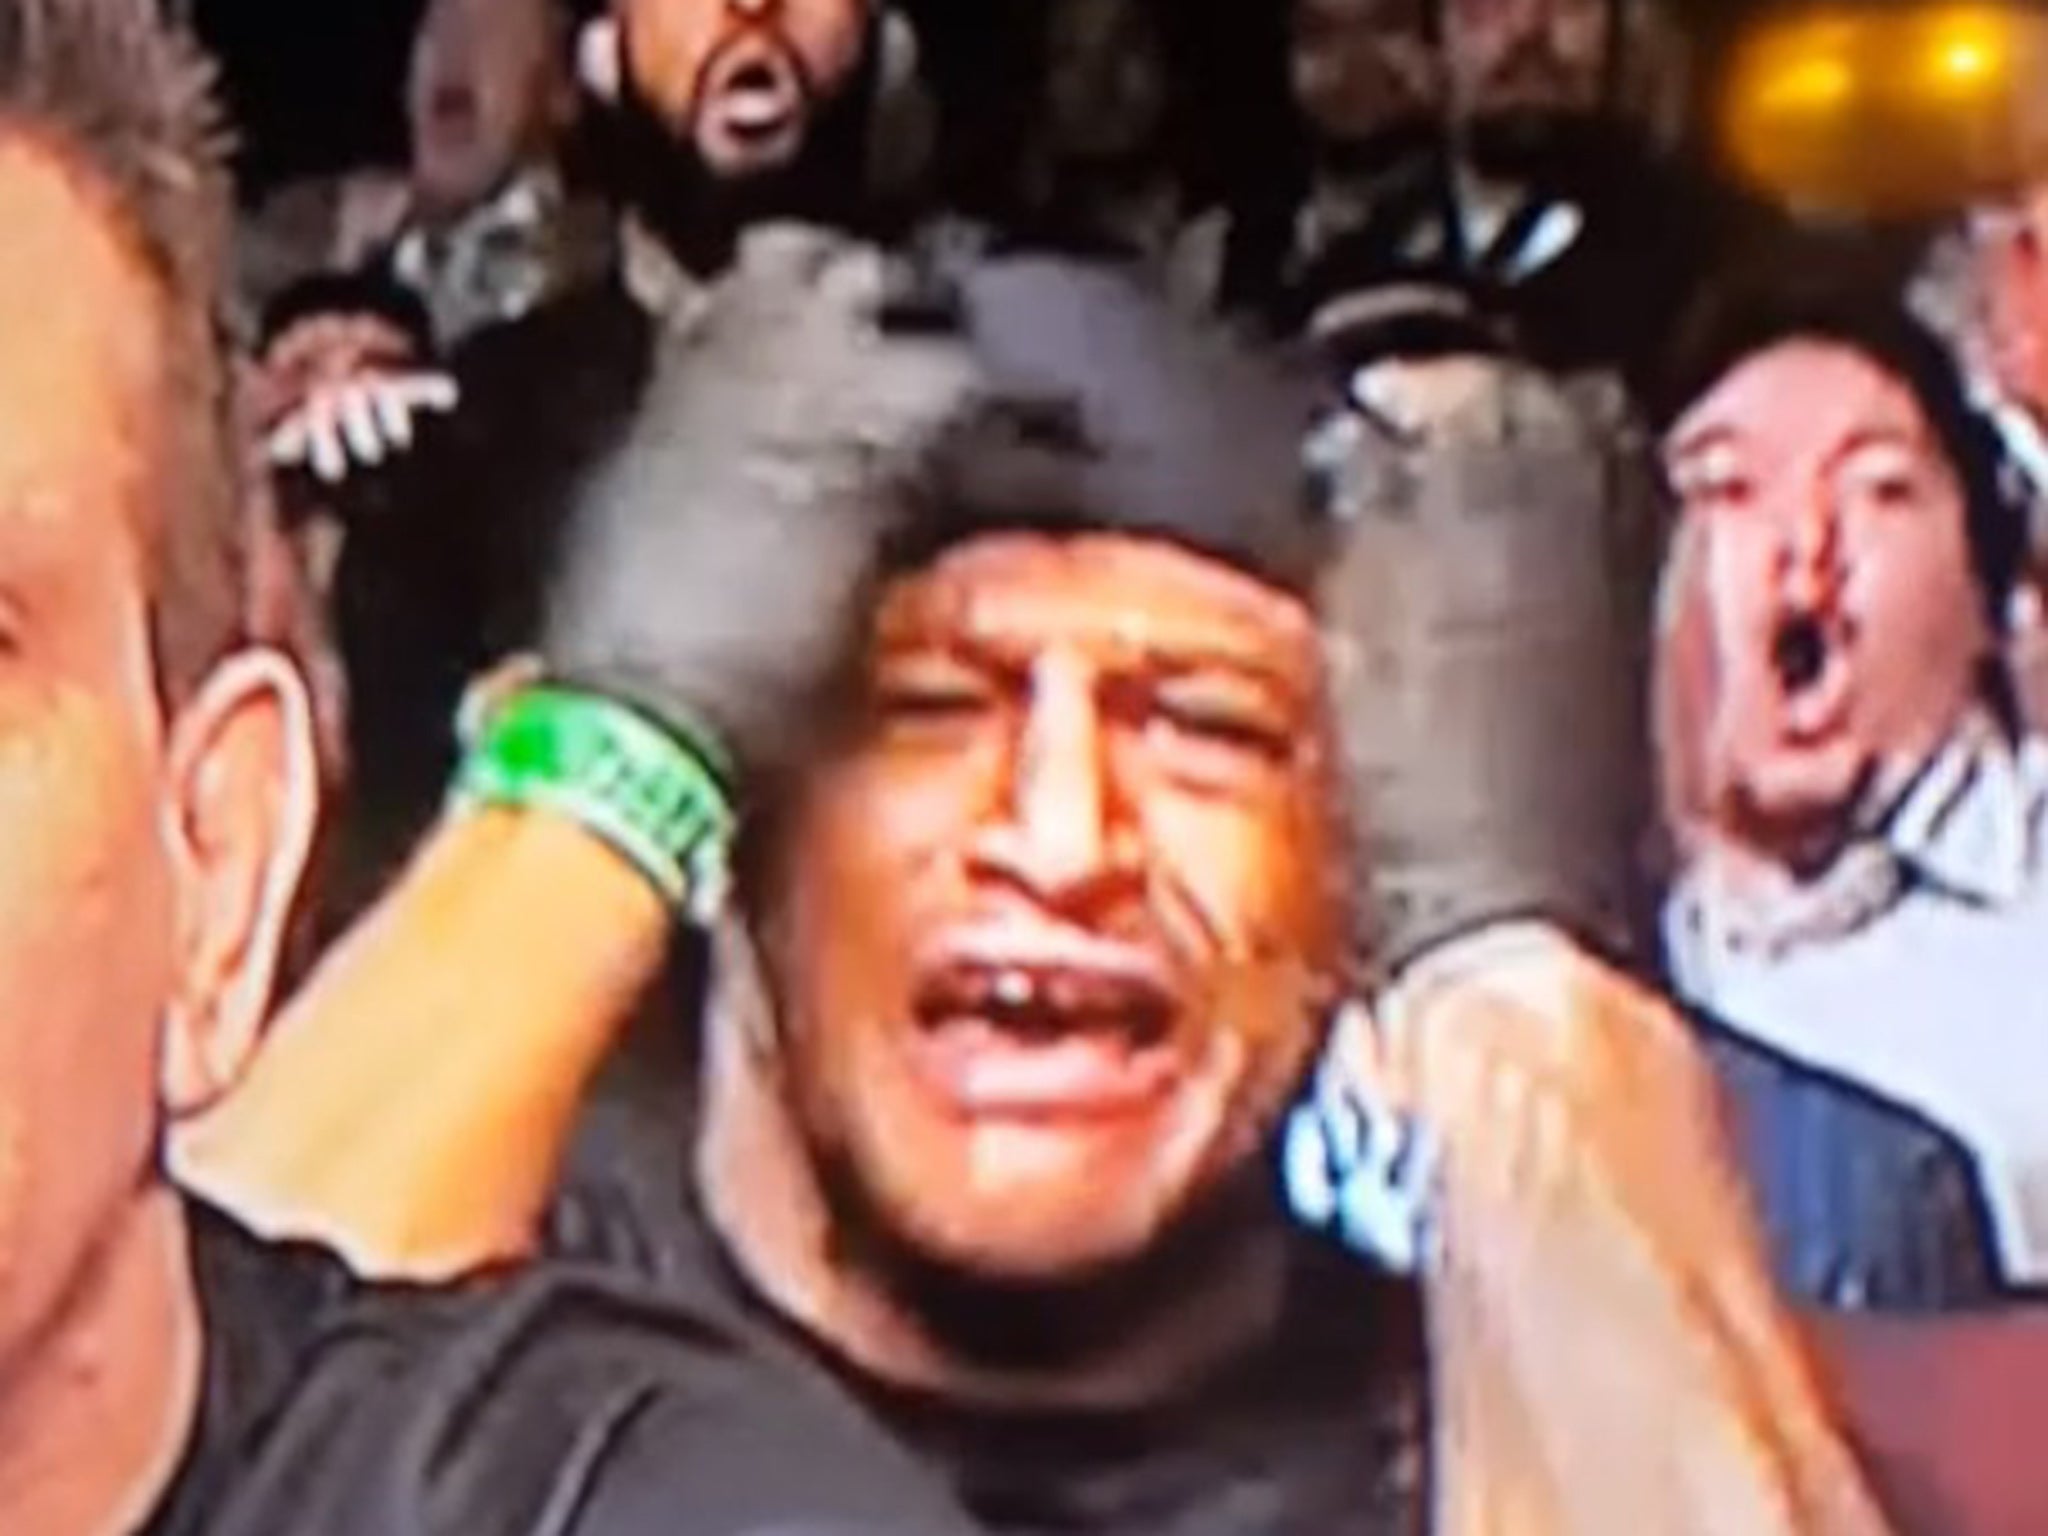 Jose Aldo's cornerman watches his fighter get knocked out